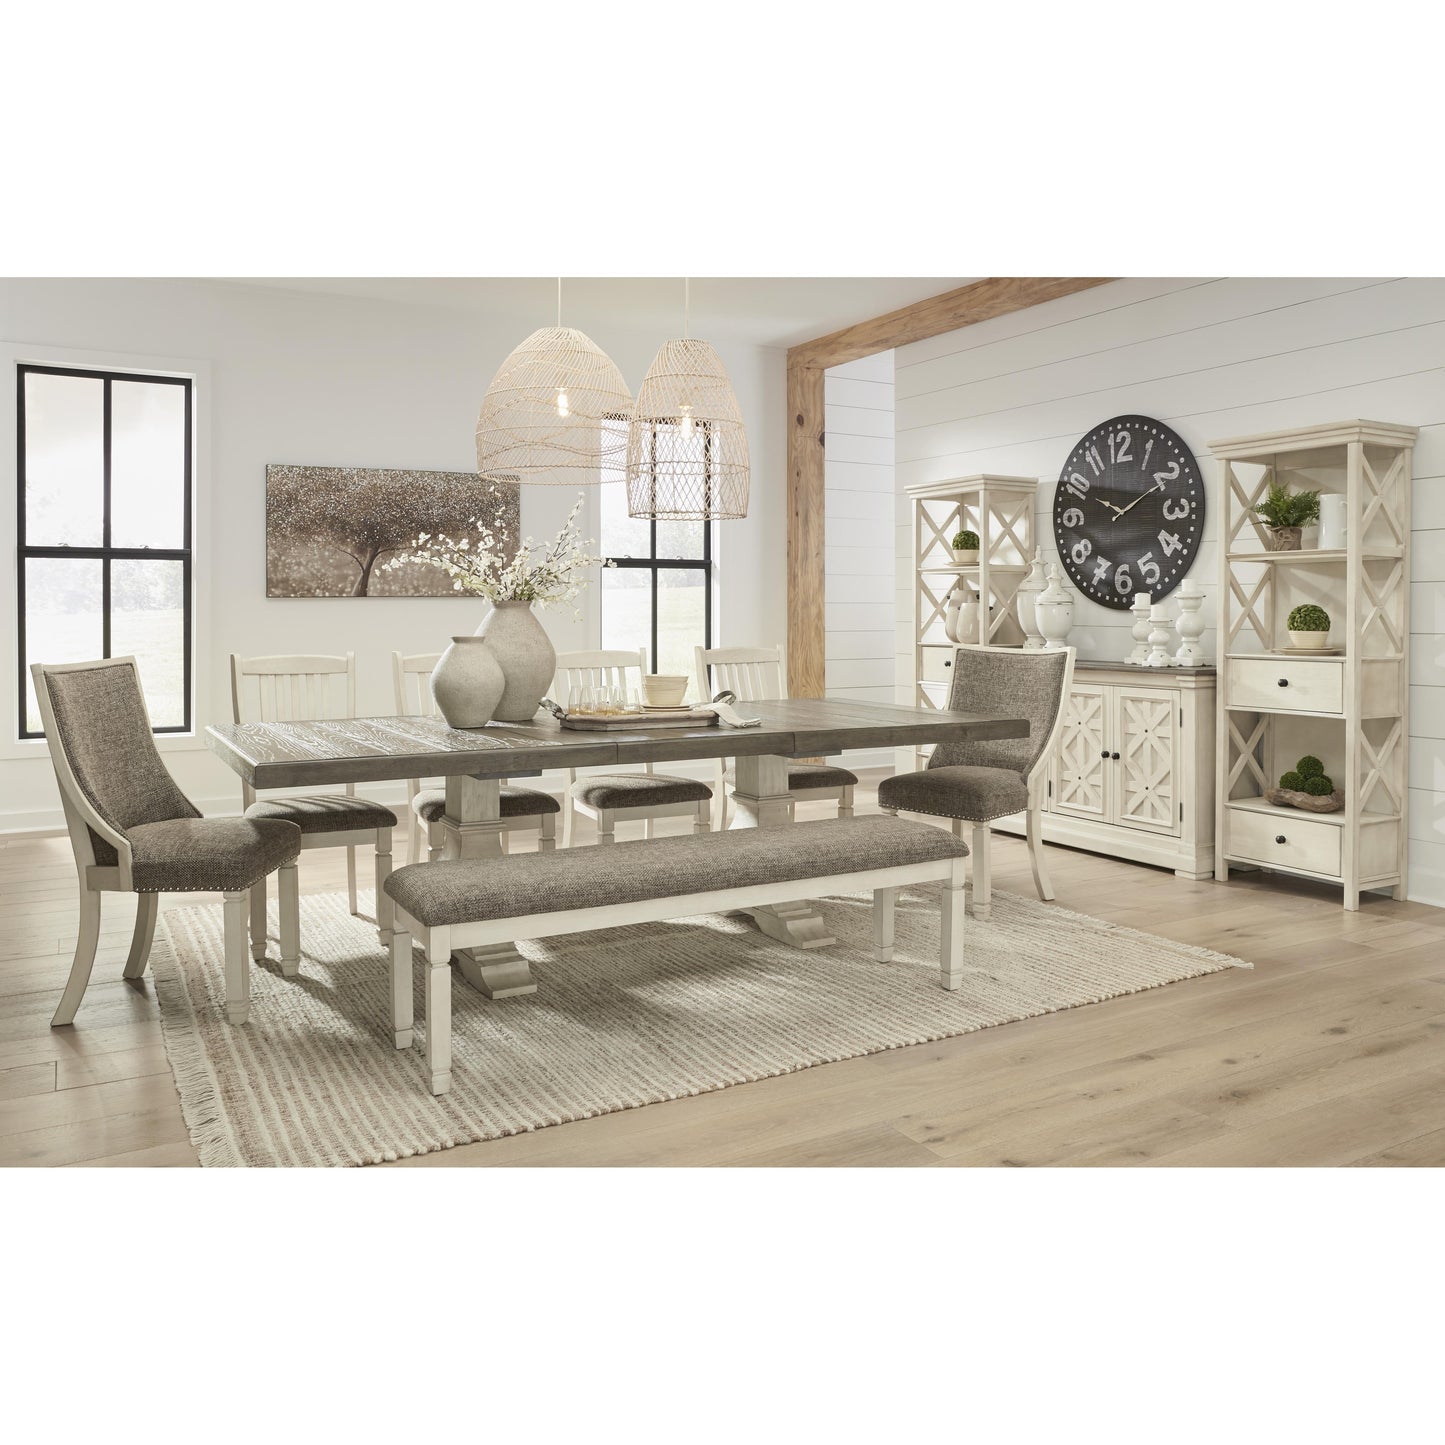 Signature Design by Ashley Bolanburg Dining Table with Trestle Base D647-55T/D647-55B IMAGE 6